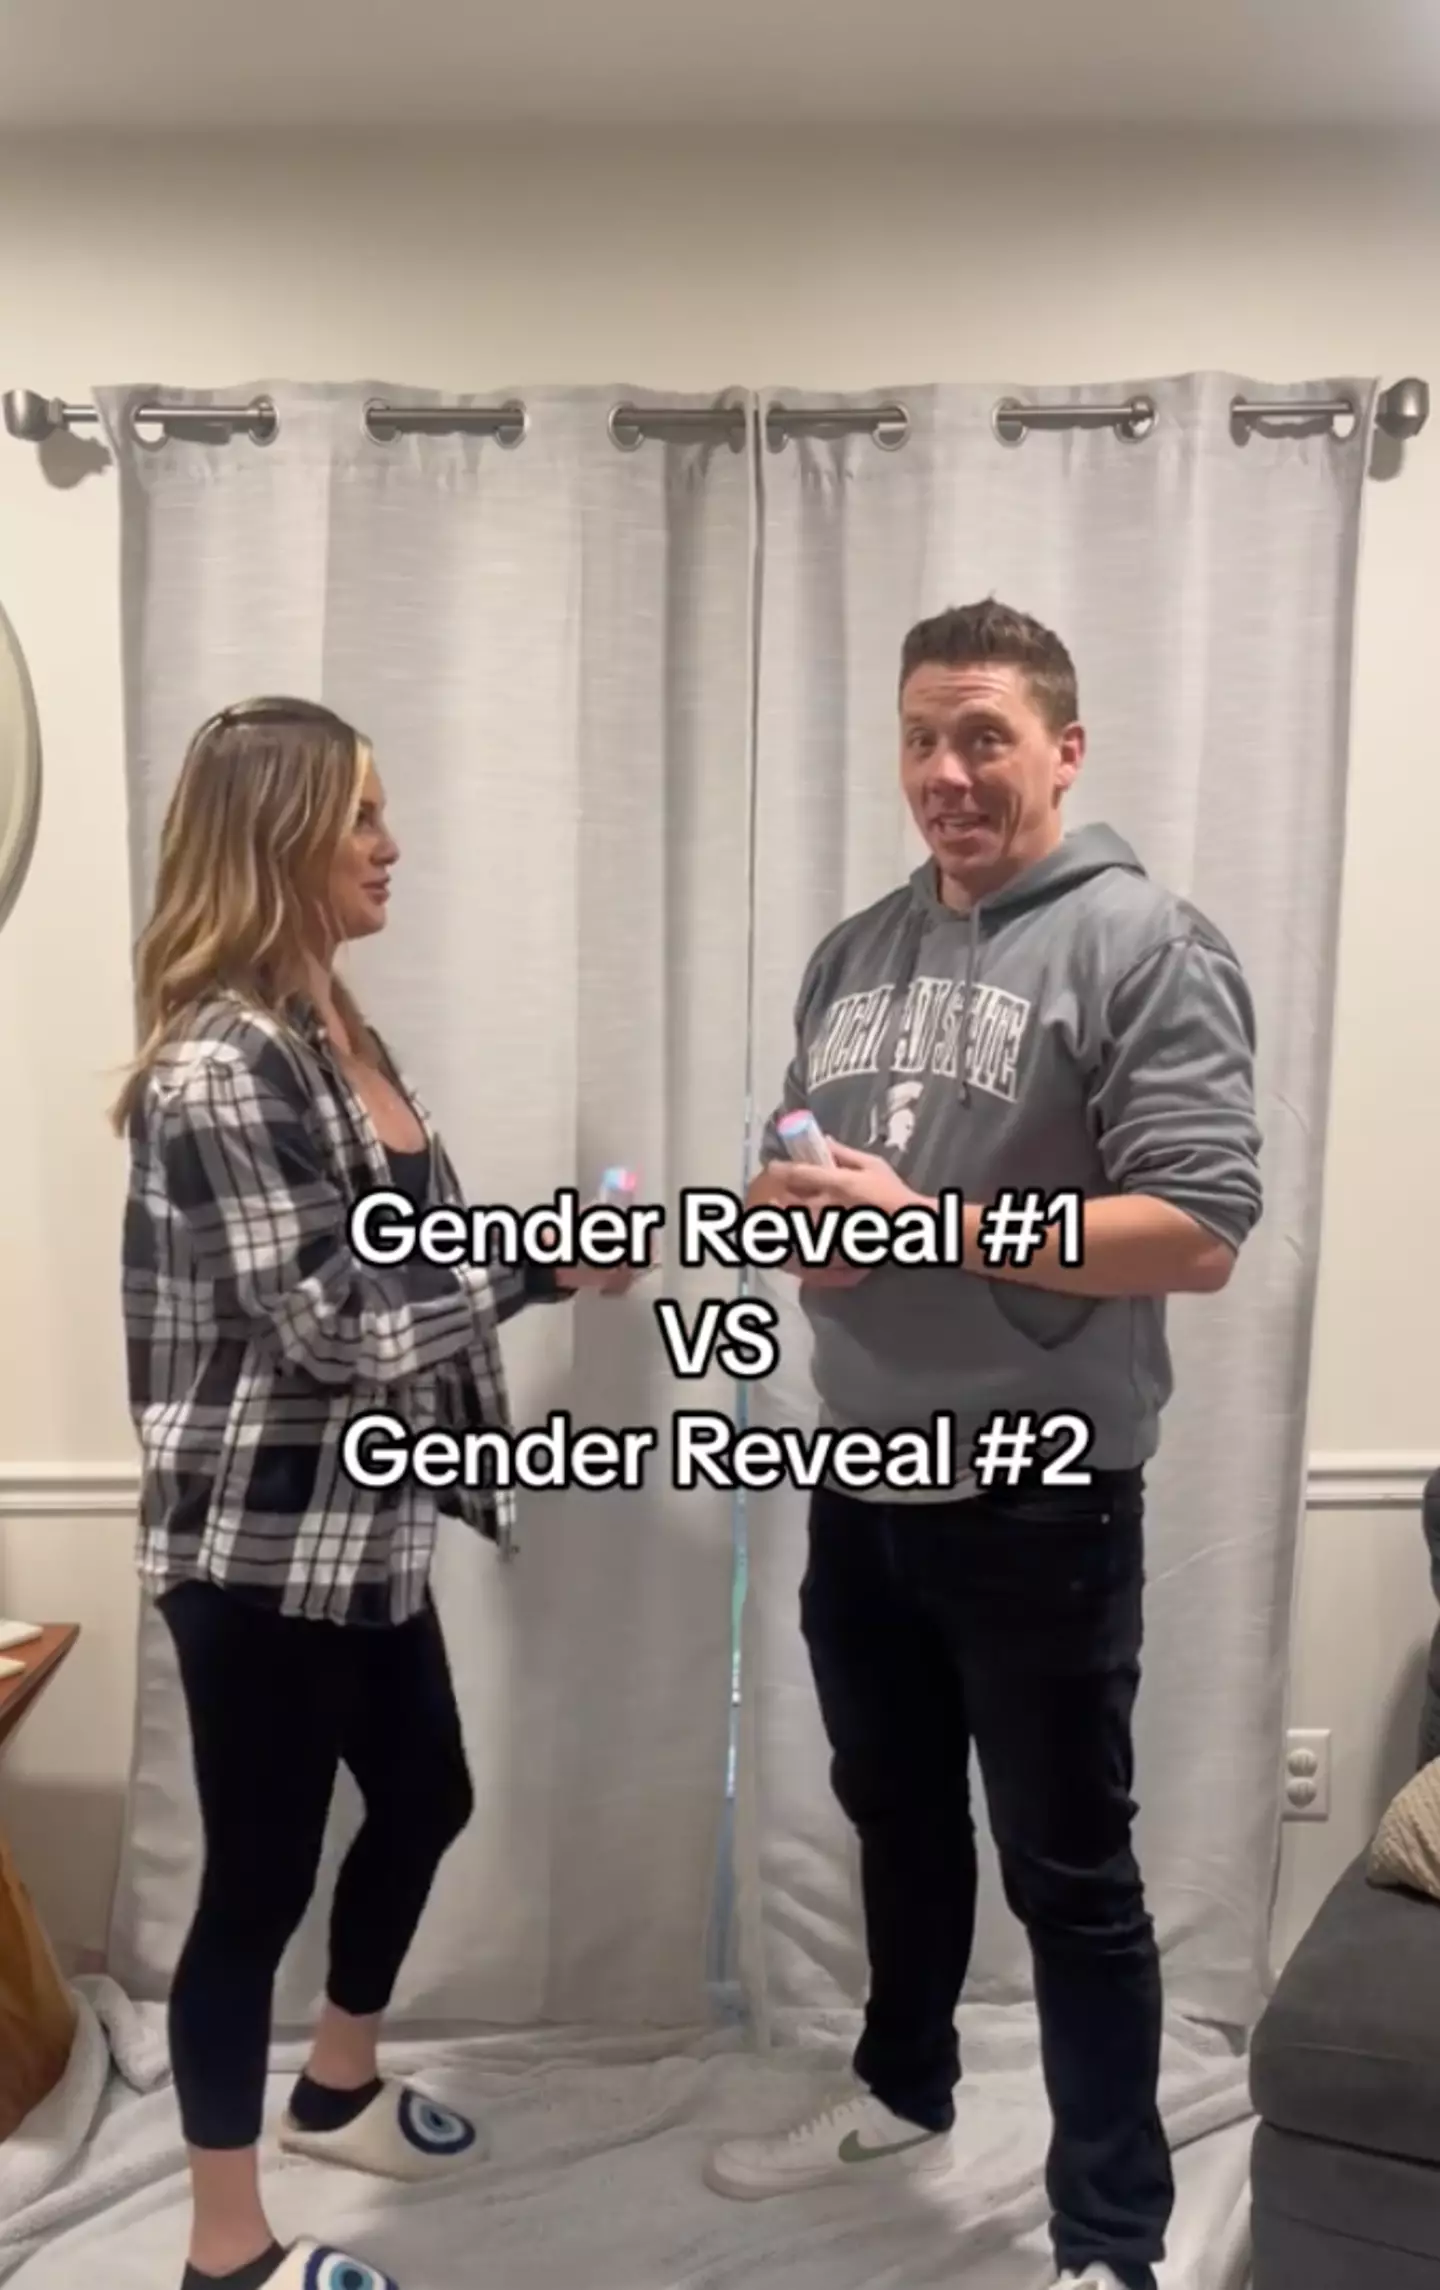 Autumn Freeman showed off two different gender reveal reactions.